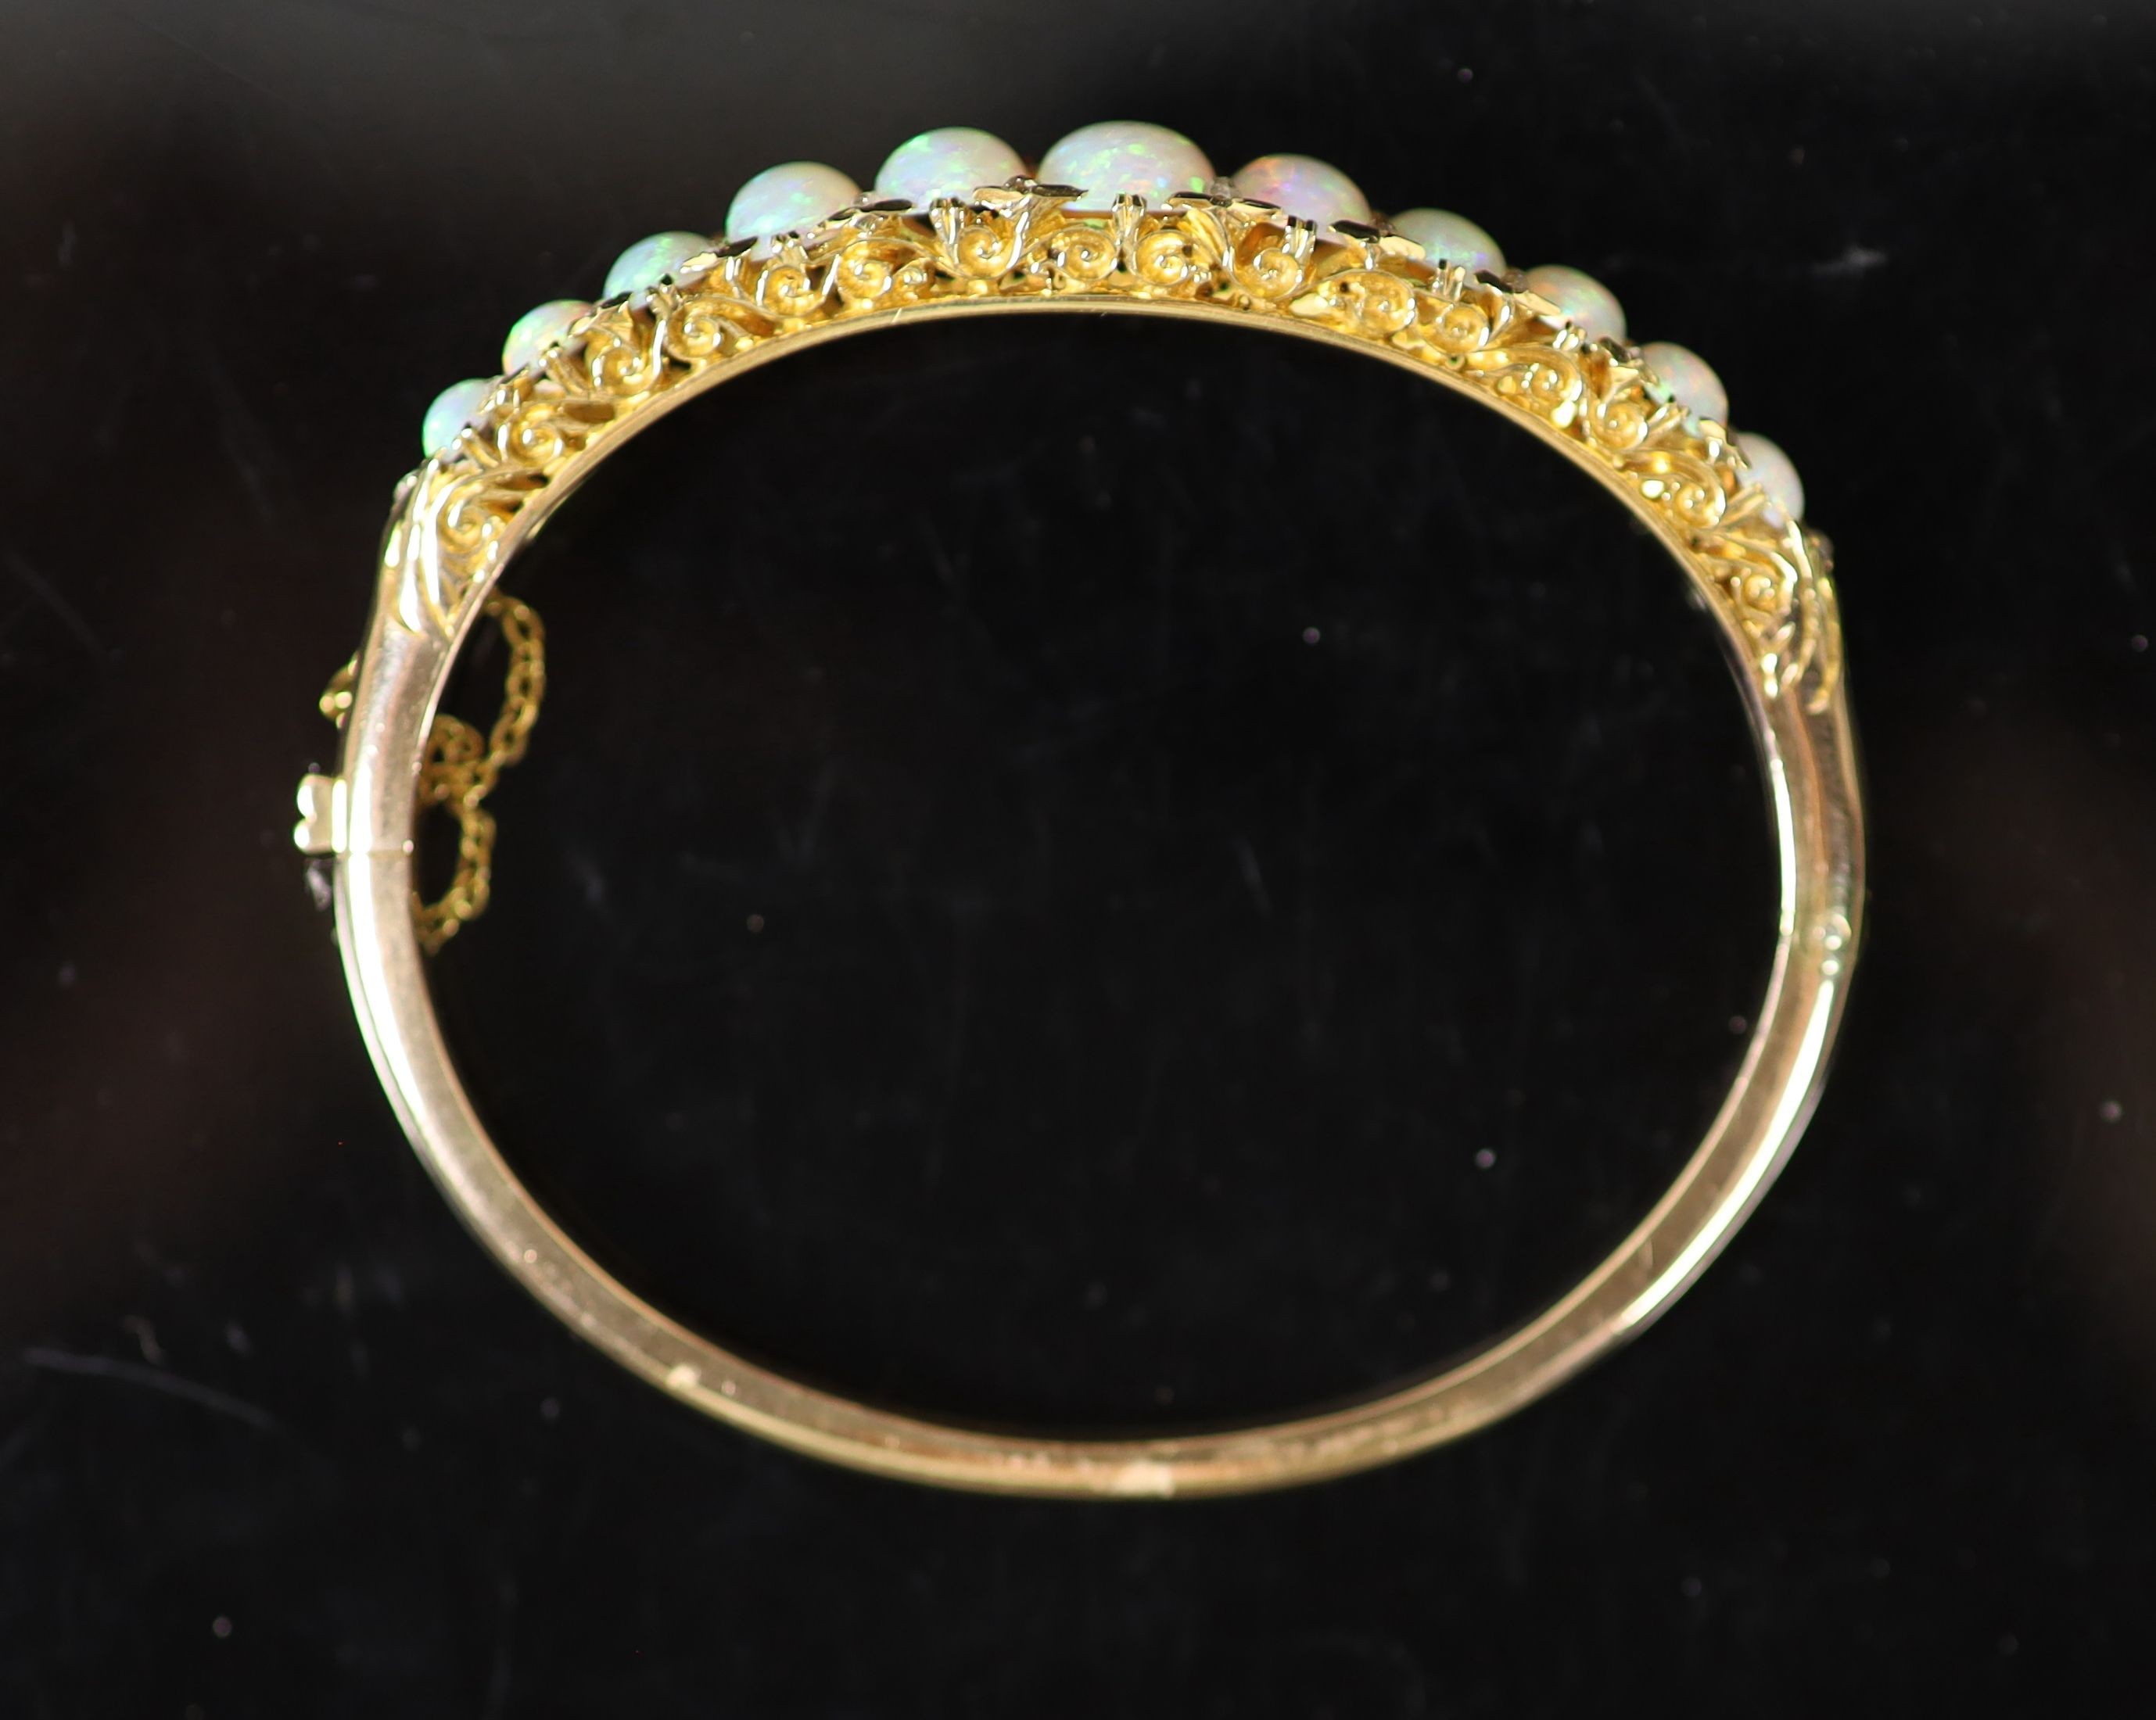 An Edwardian gold and graduated eleven stone white opal set hinged bracelet, with diamond chip spacers